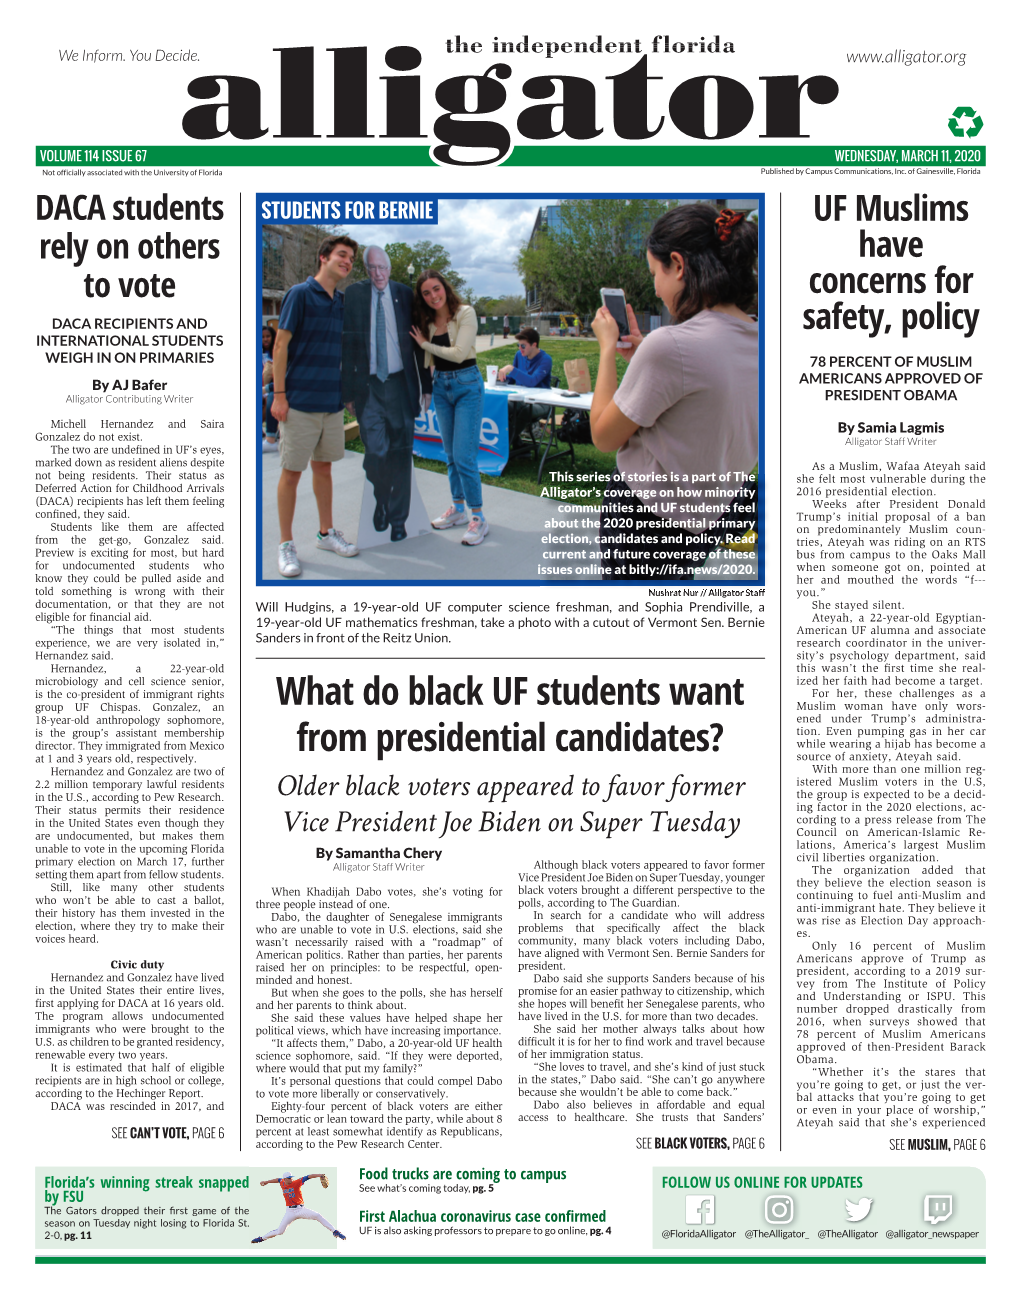 What Do Black UF Students Want from Presidential Candidates?